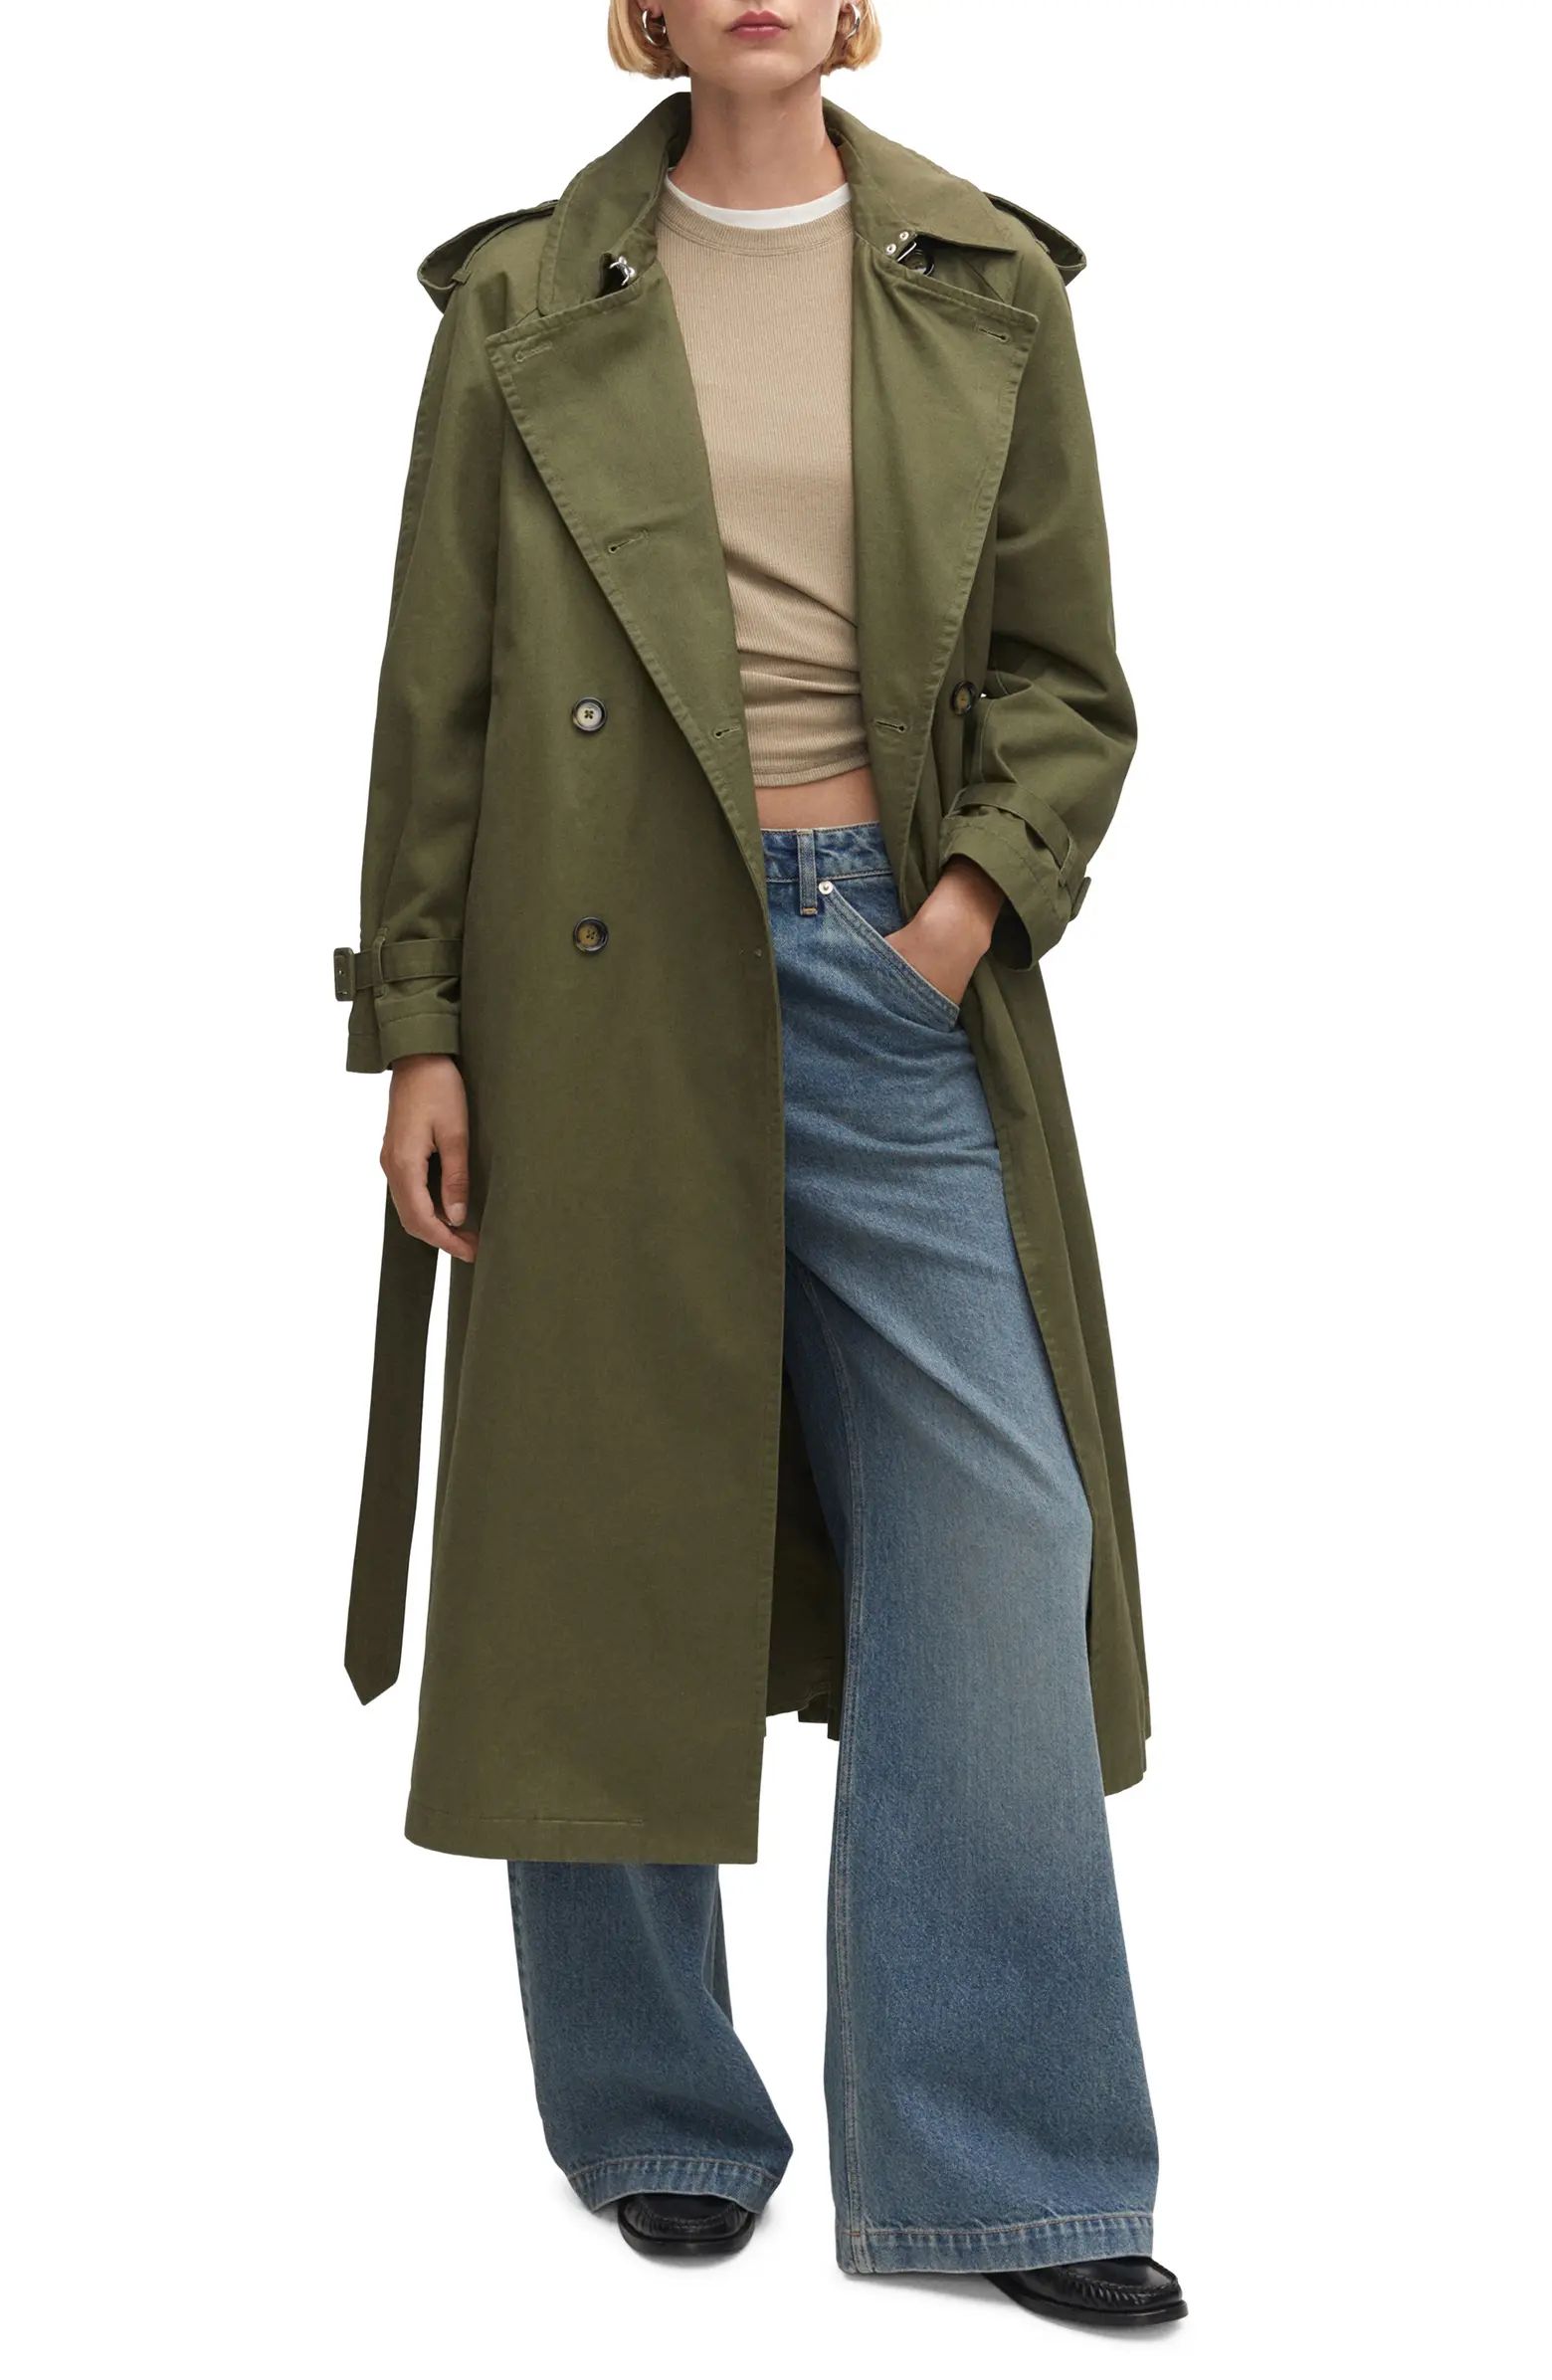 Cotton Trench Coat | Nordstrom